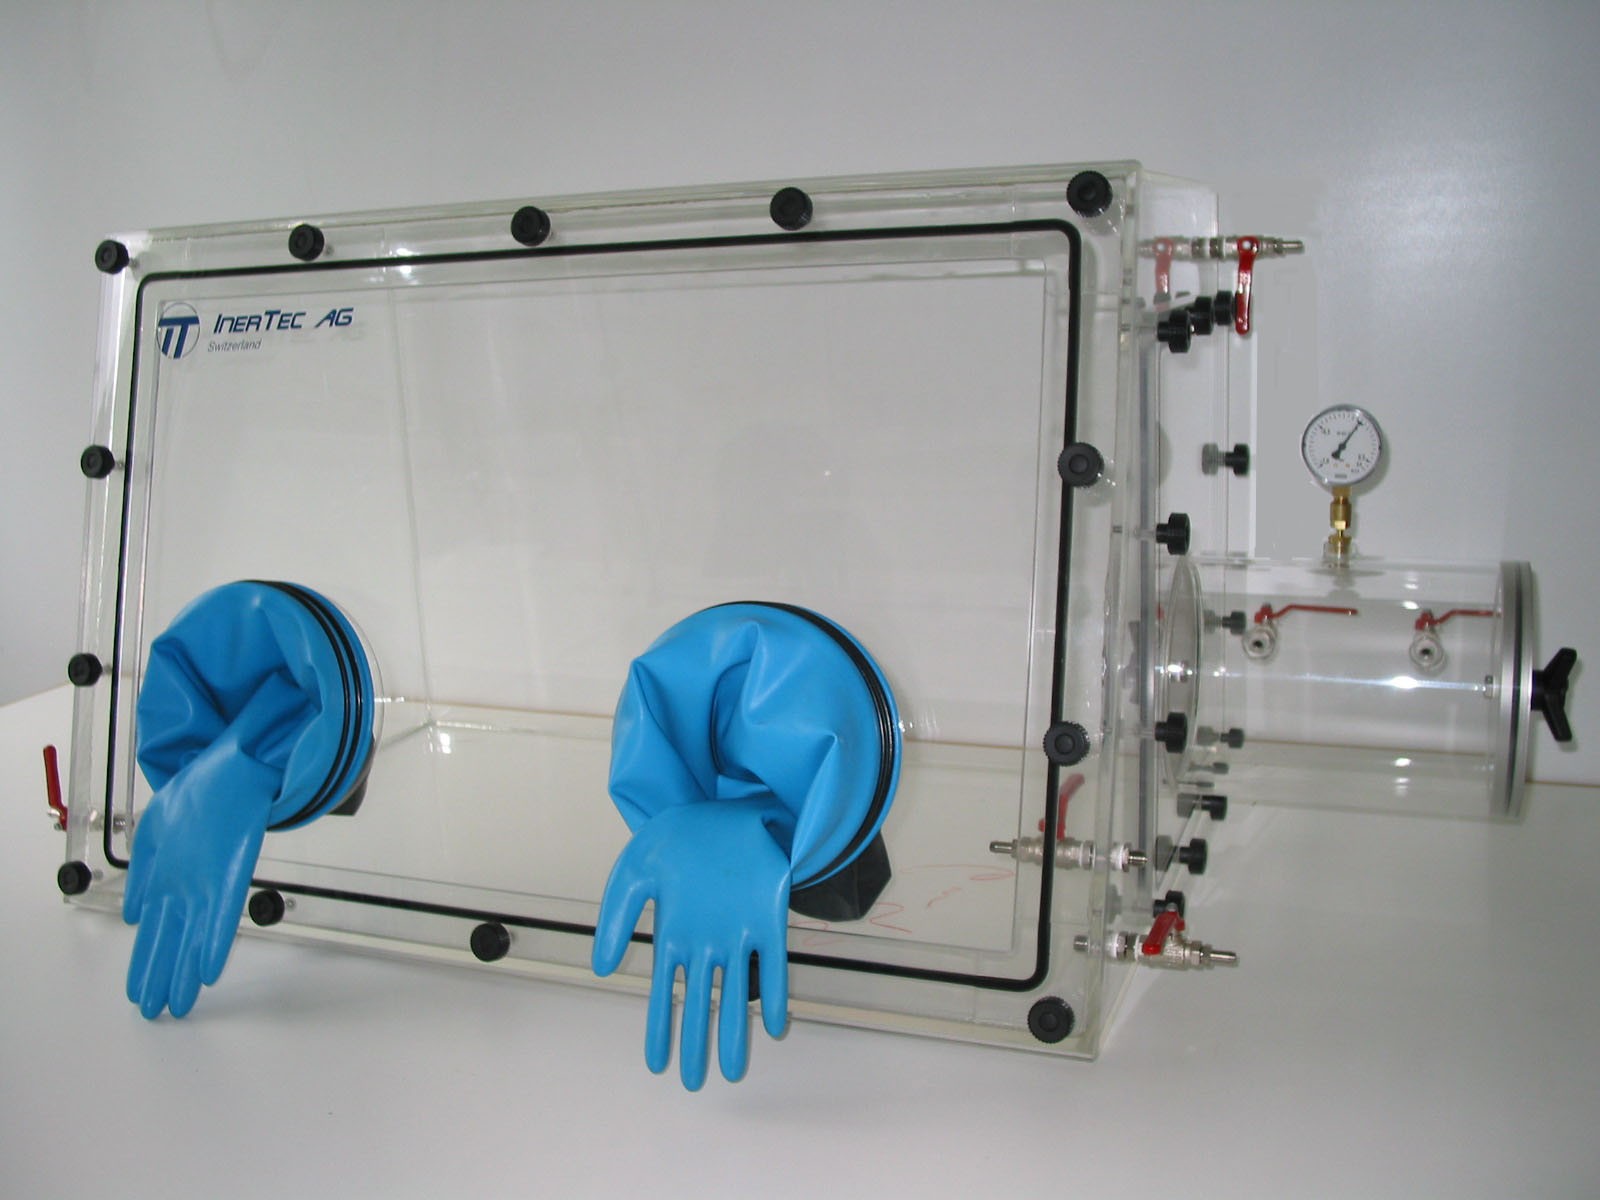 Glovebox made of acrylic&gt; Gas filling: automatic flushing with pressure control, front design: removable, side design: rectangular lock, control: oxygen regulator